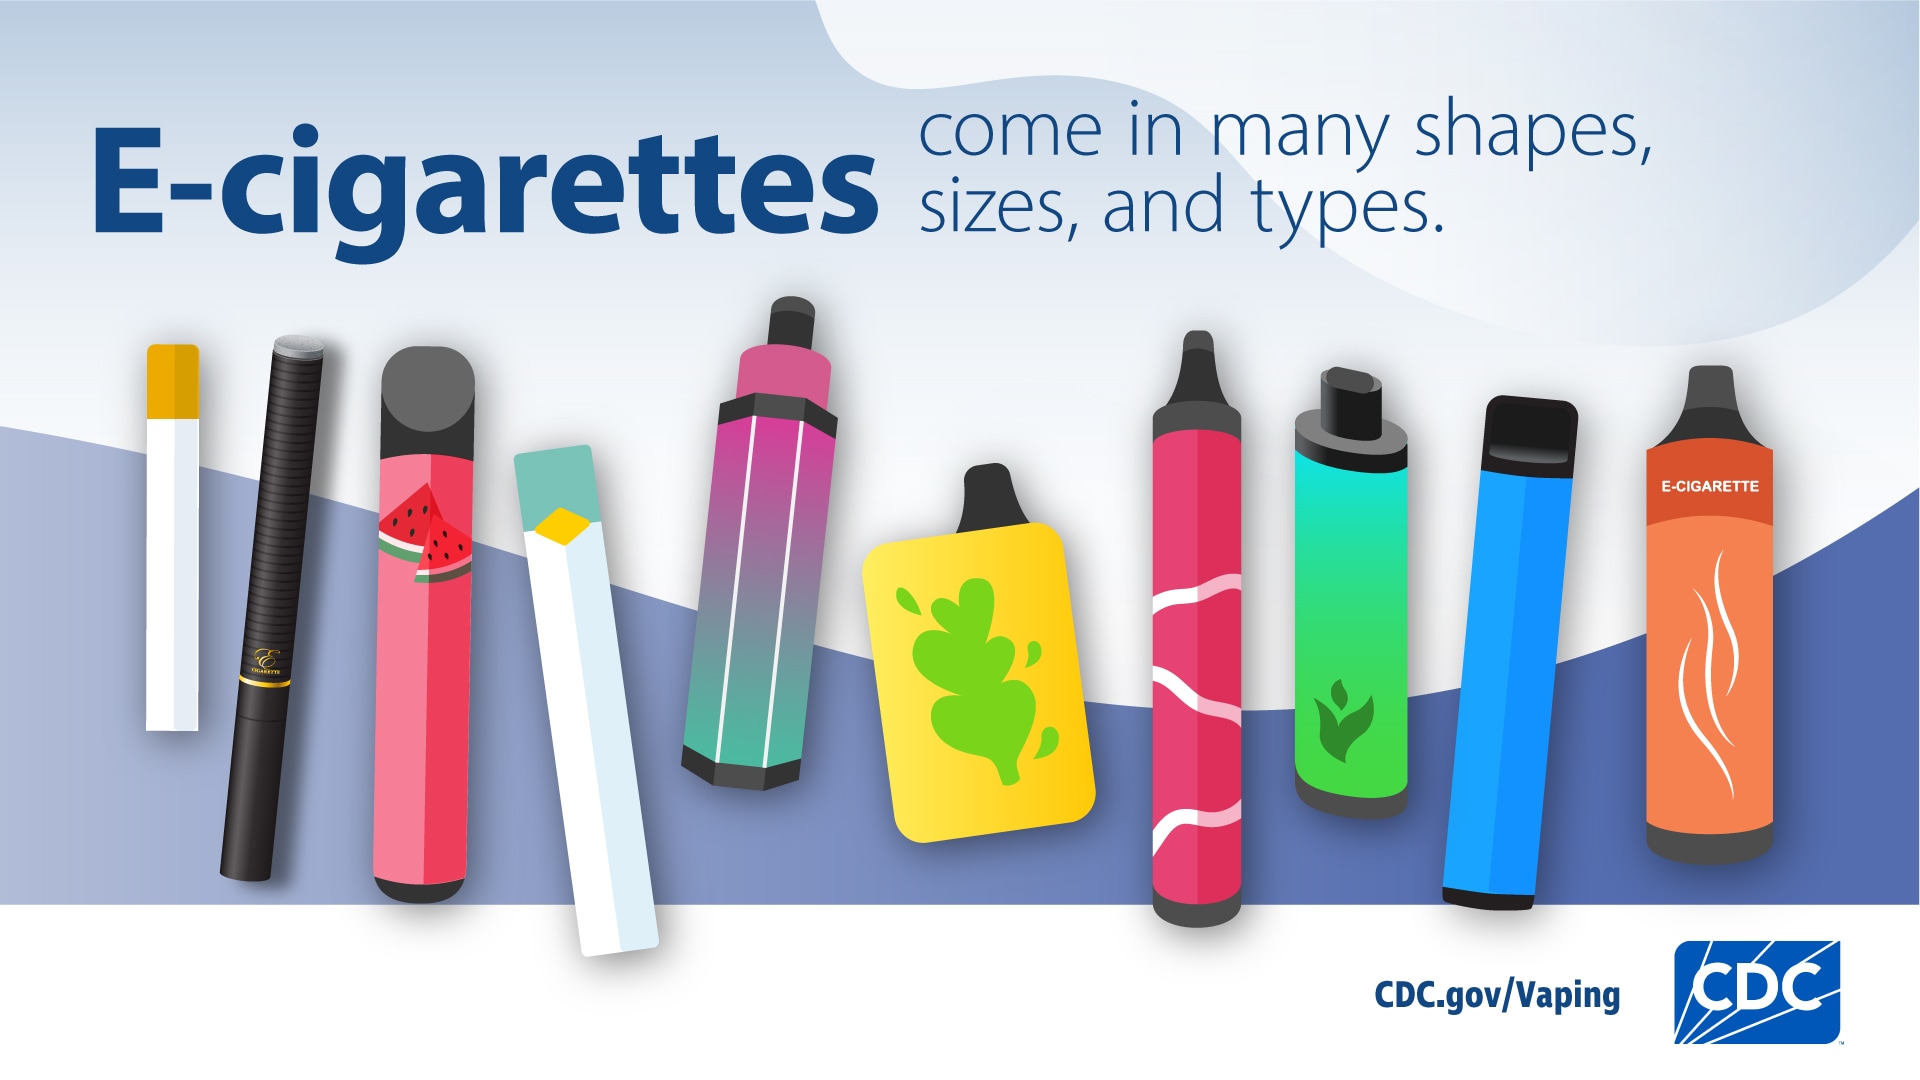 Visual depictions of e-cigarette and vaping devices in different shapes, sizes, and colors